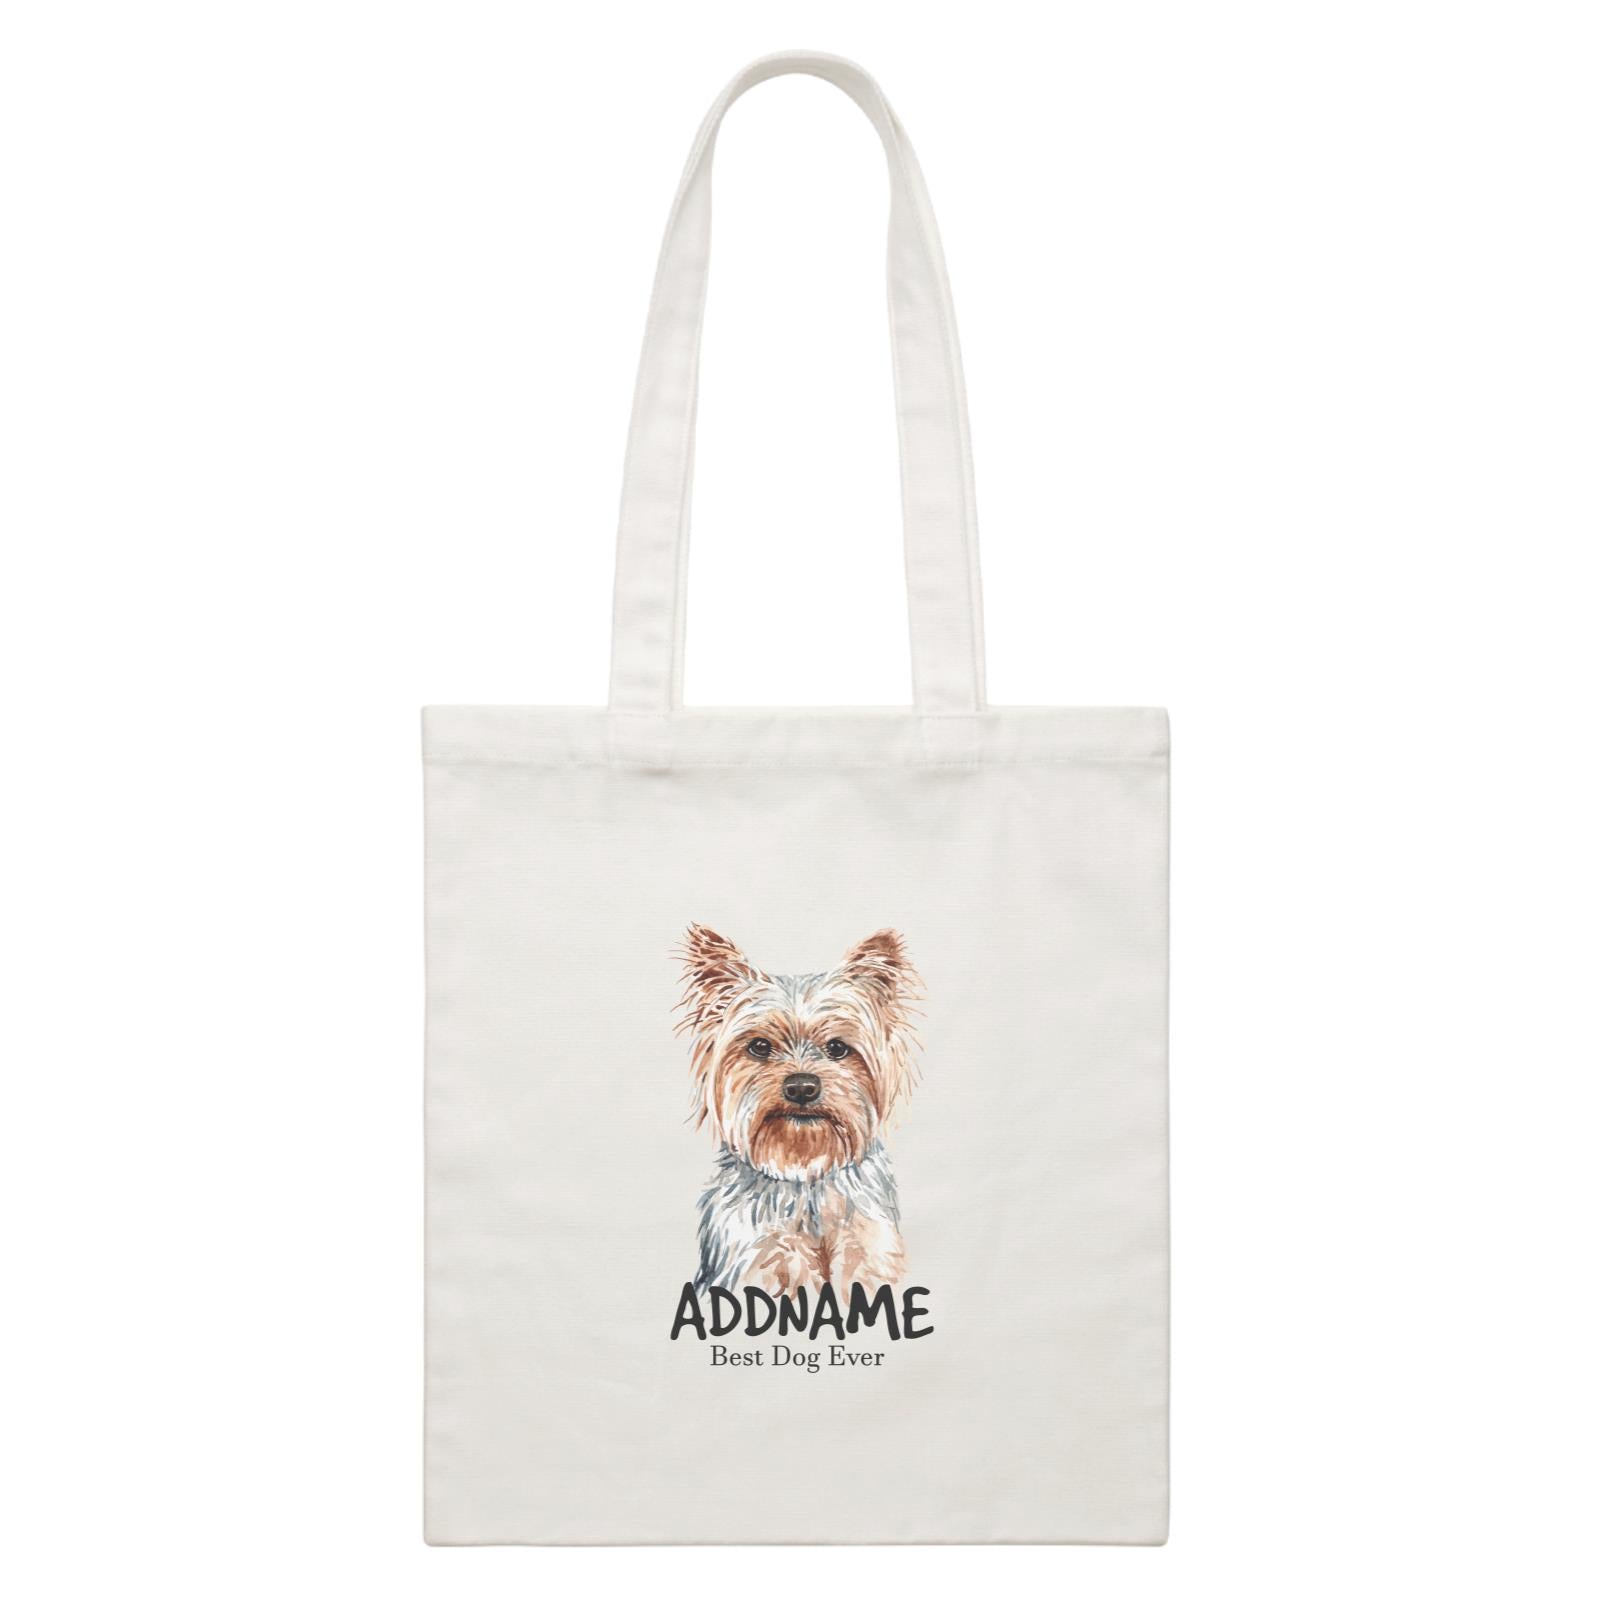 Watercolor Dog Yorkshire Terrier Best Dog Ever Addname White Canvas Bag